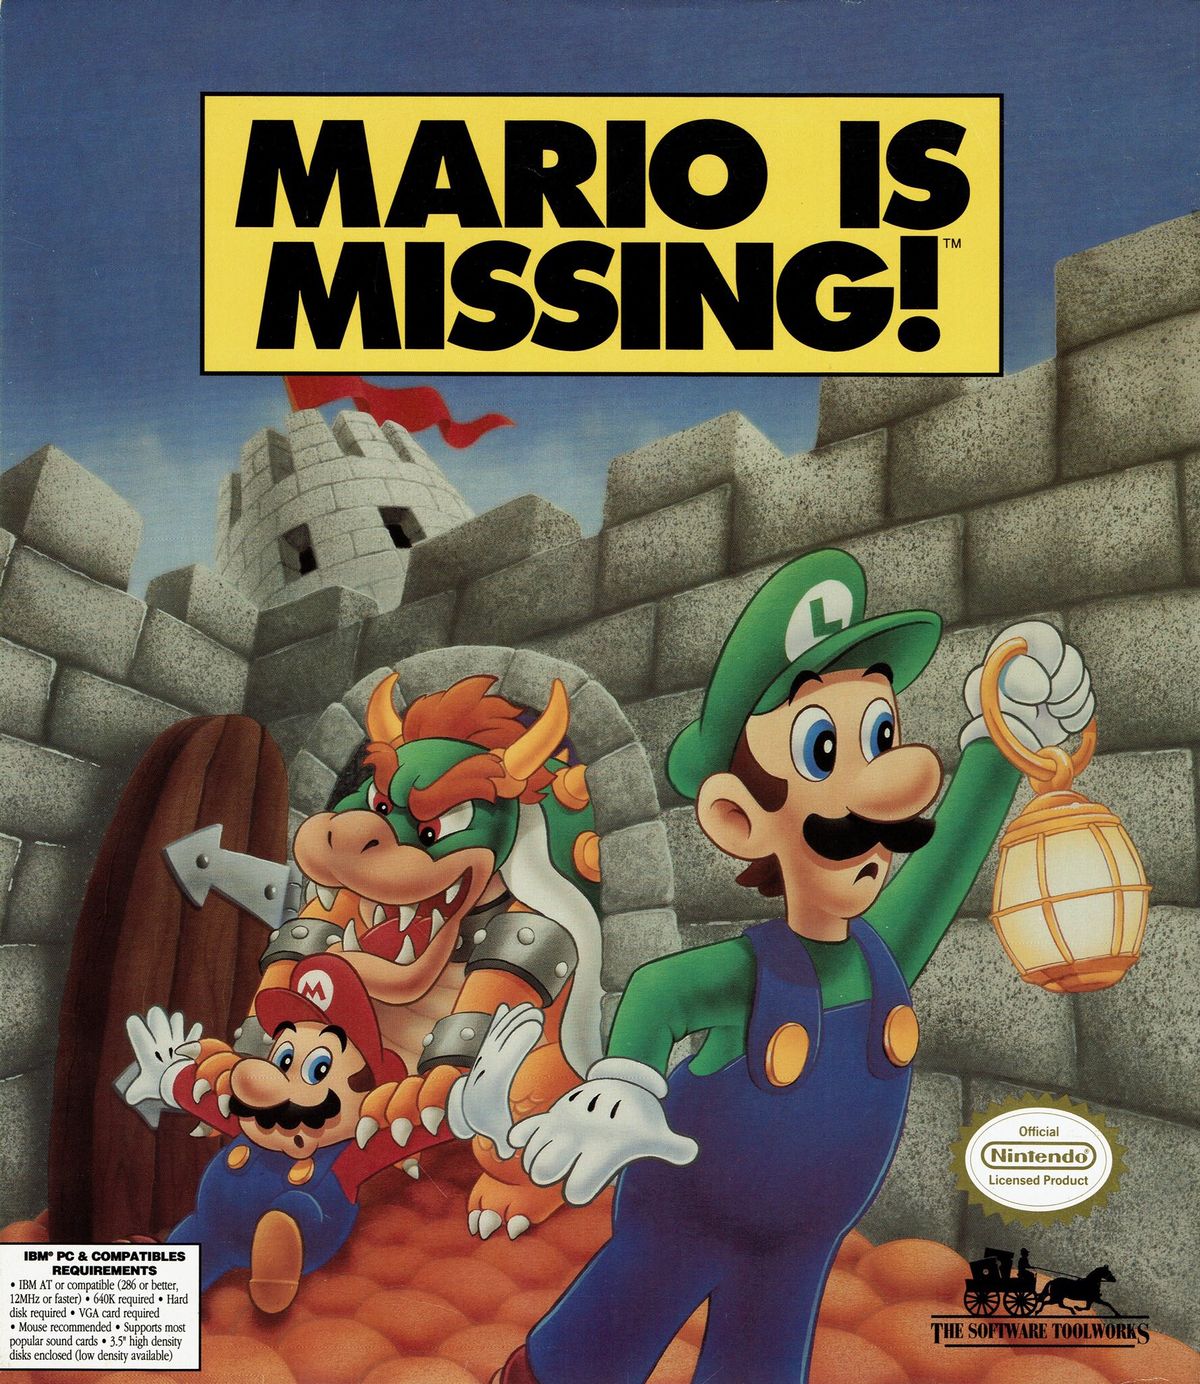 Mario is missing fan game